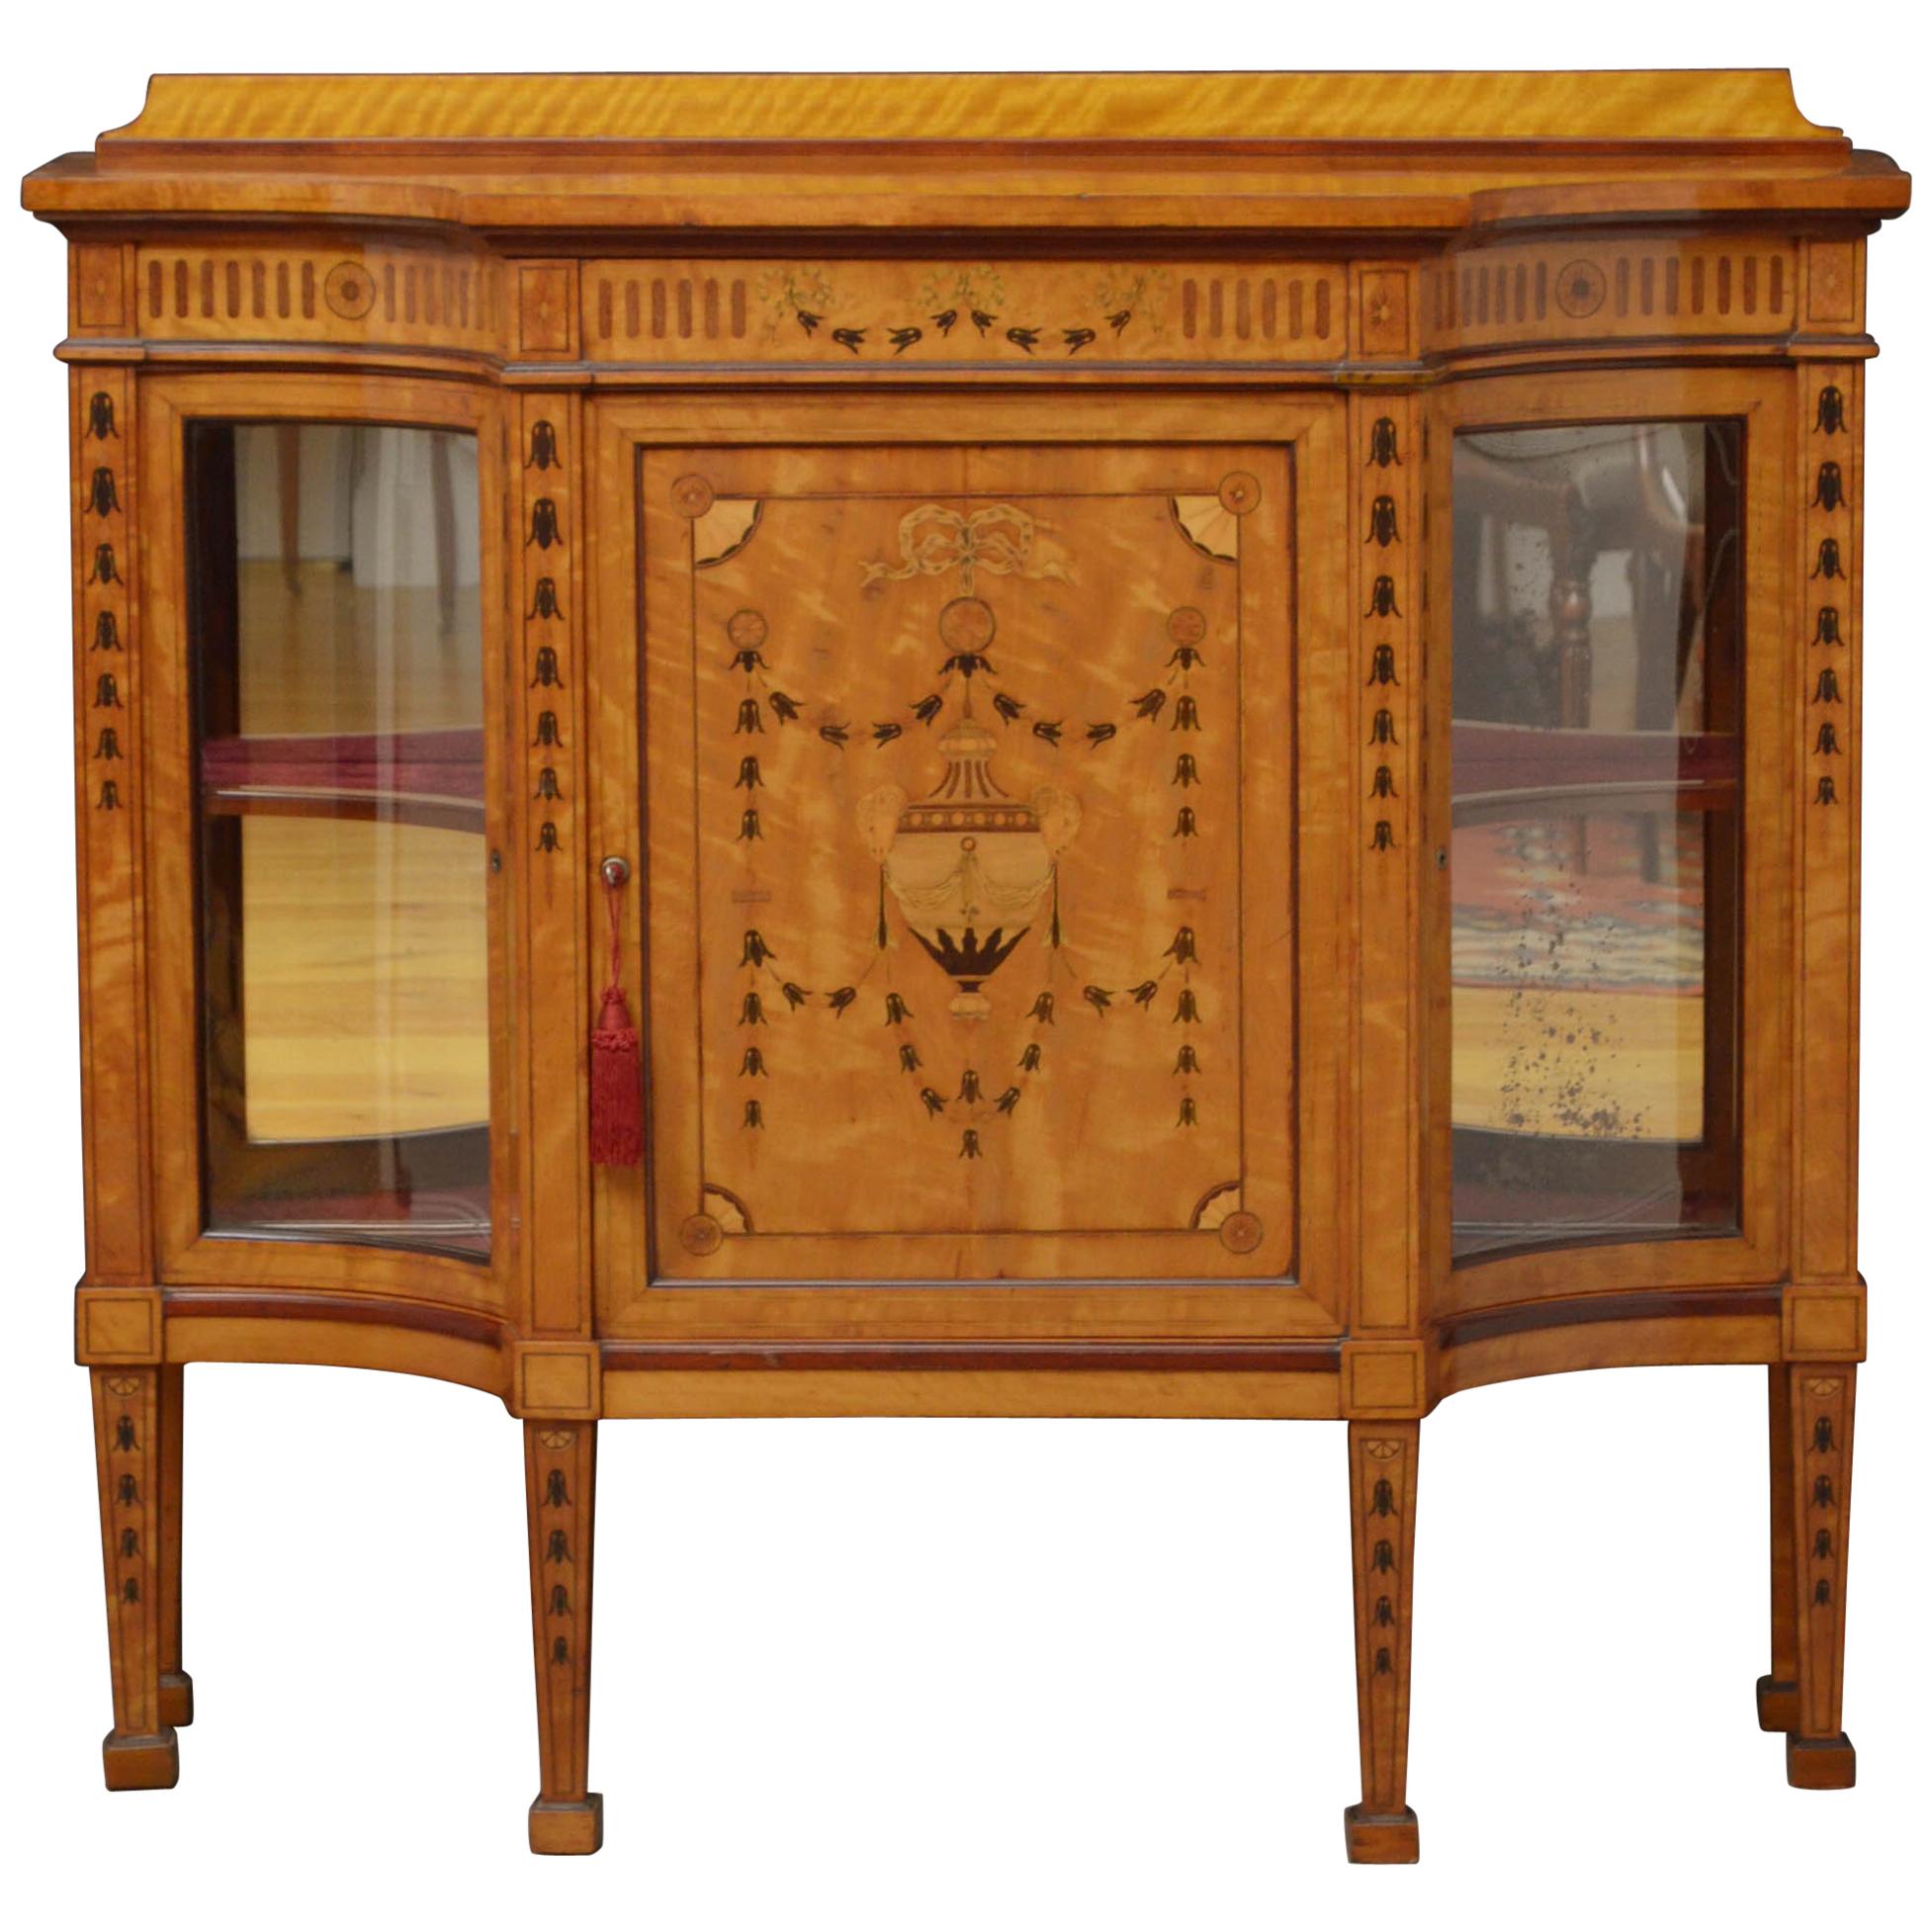 Exceptional Satinwood Cabinet by Maple & Co.